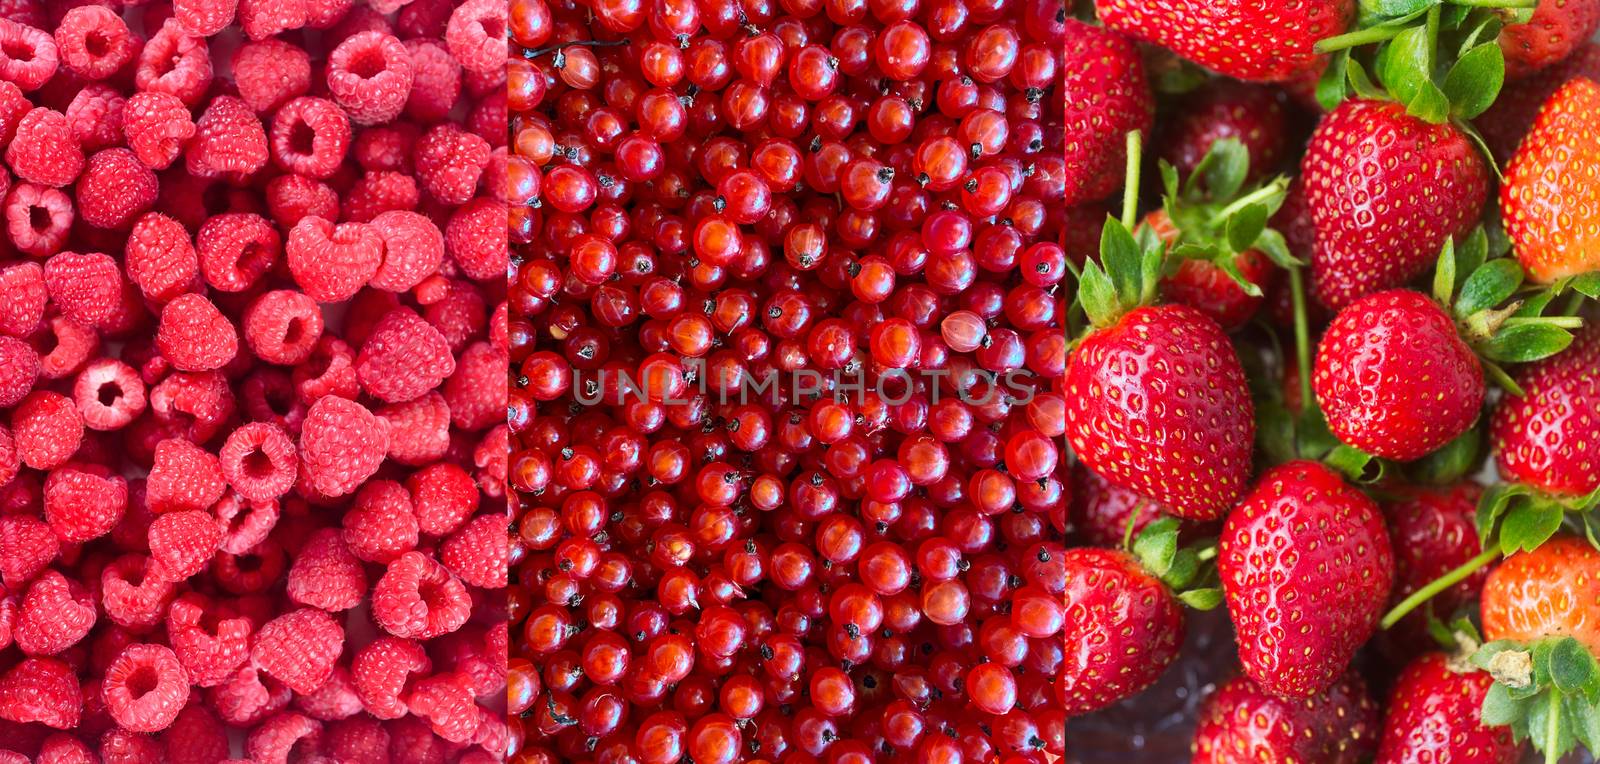 Collection of varios Ripe juicy red berries currant, raspberry and strawberry background. Natural food berries. Healthy food organic concept.